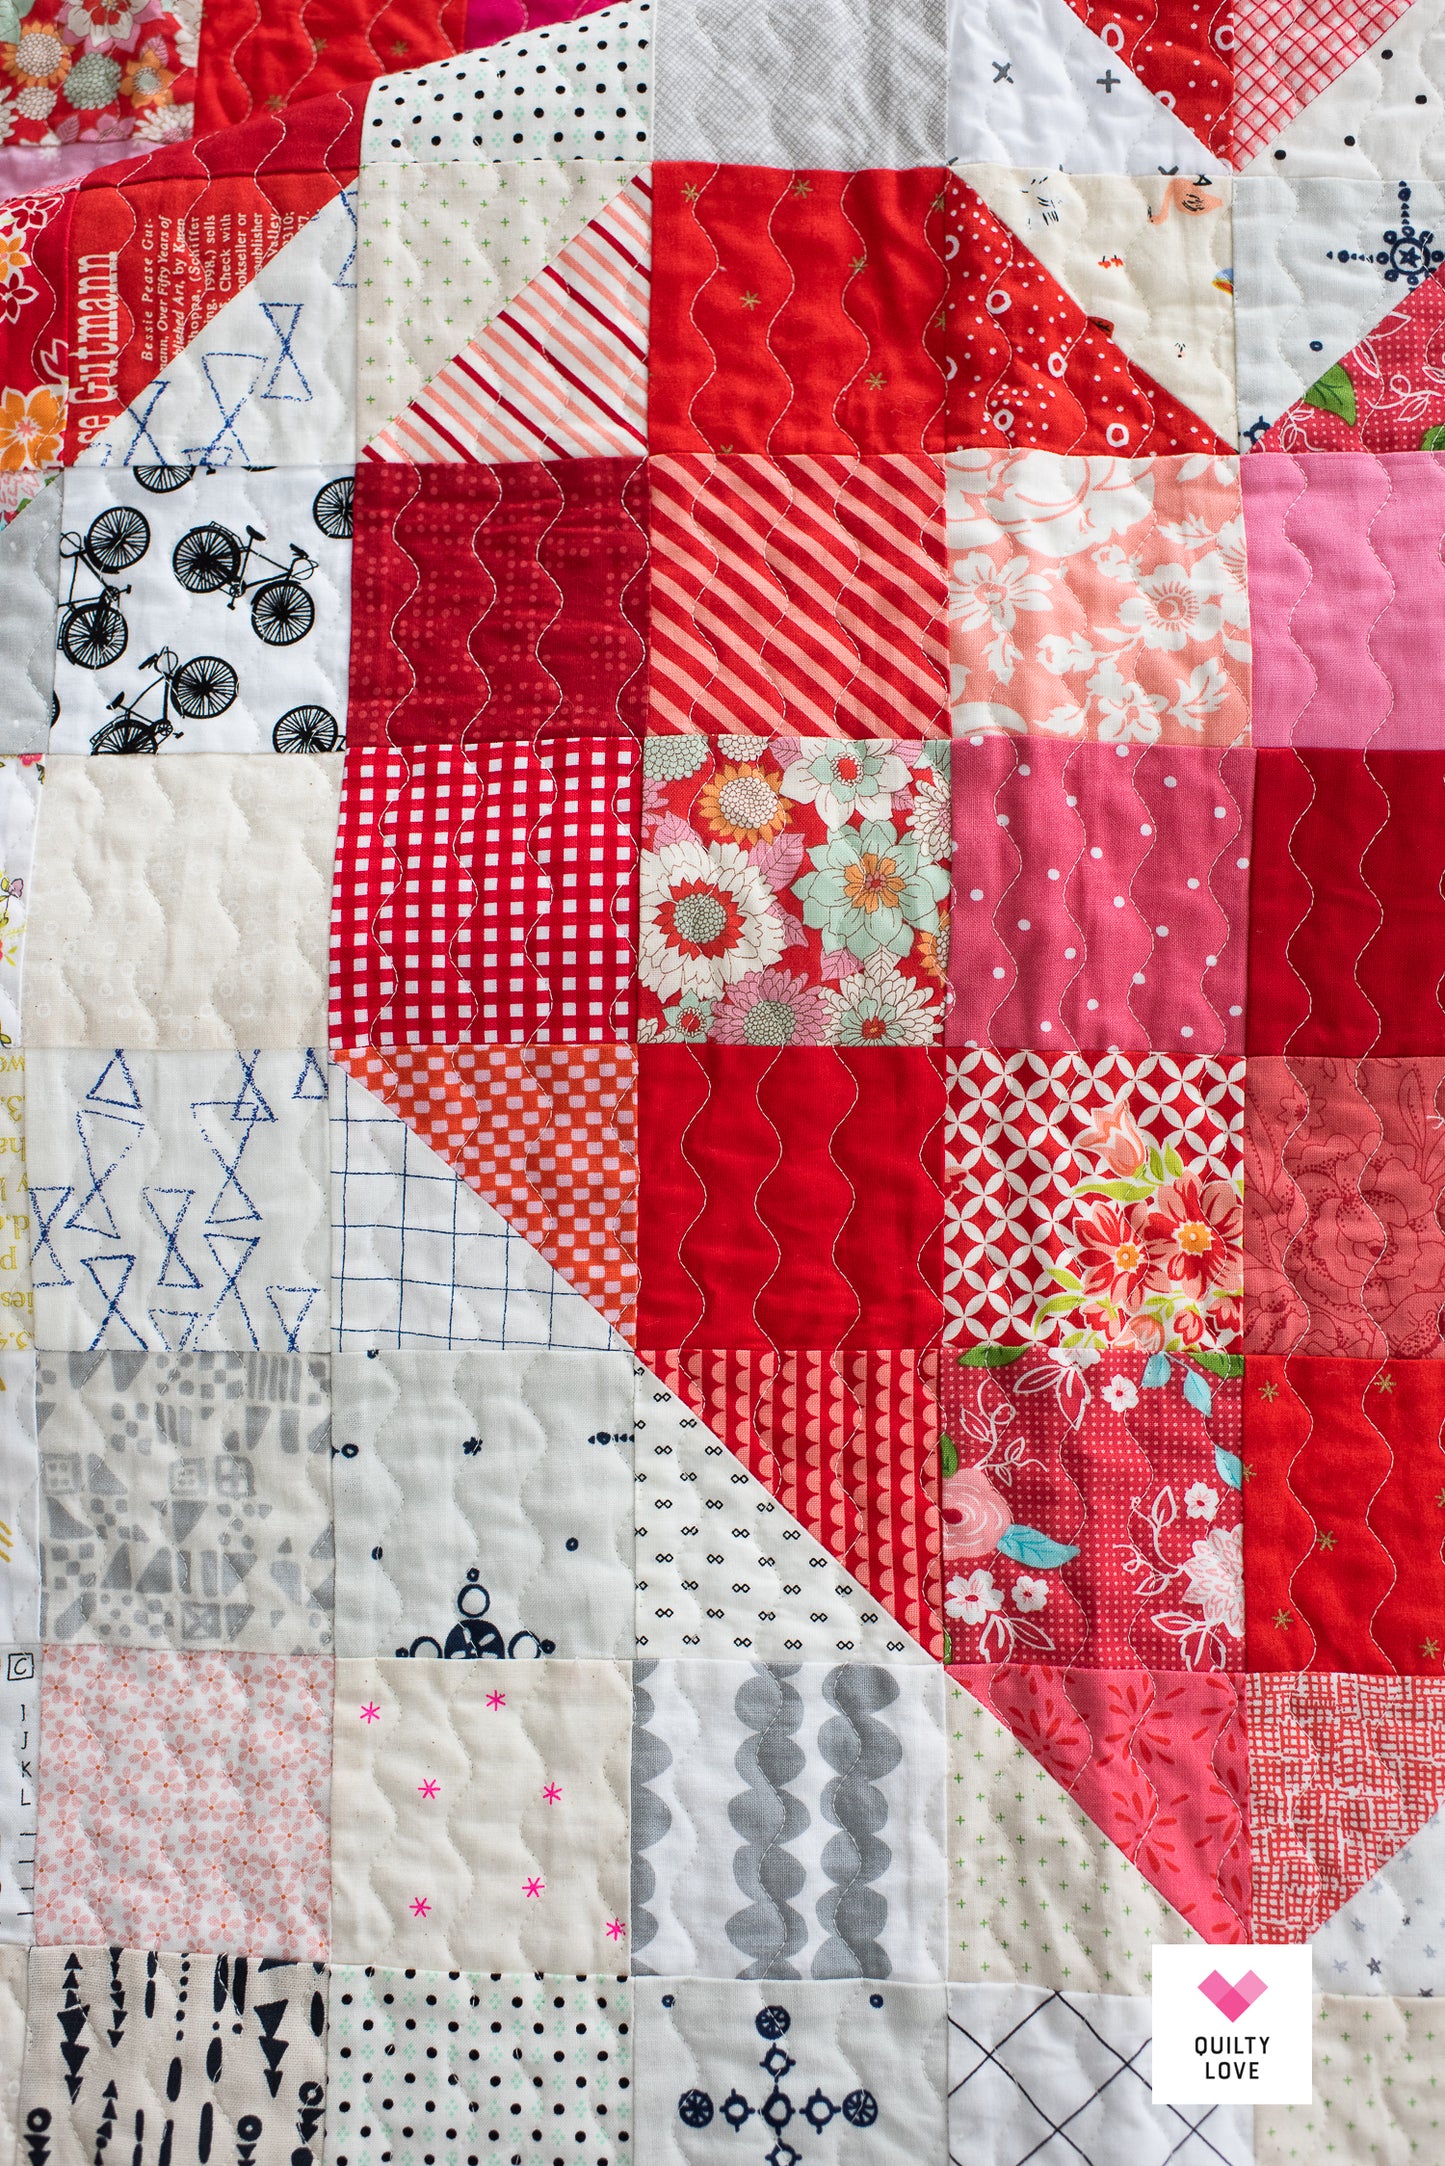 Scrappy Hearts Quilt - The scrappy scrappy one